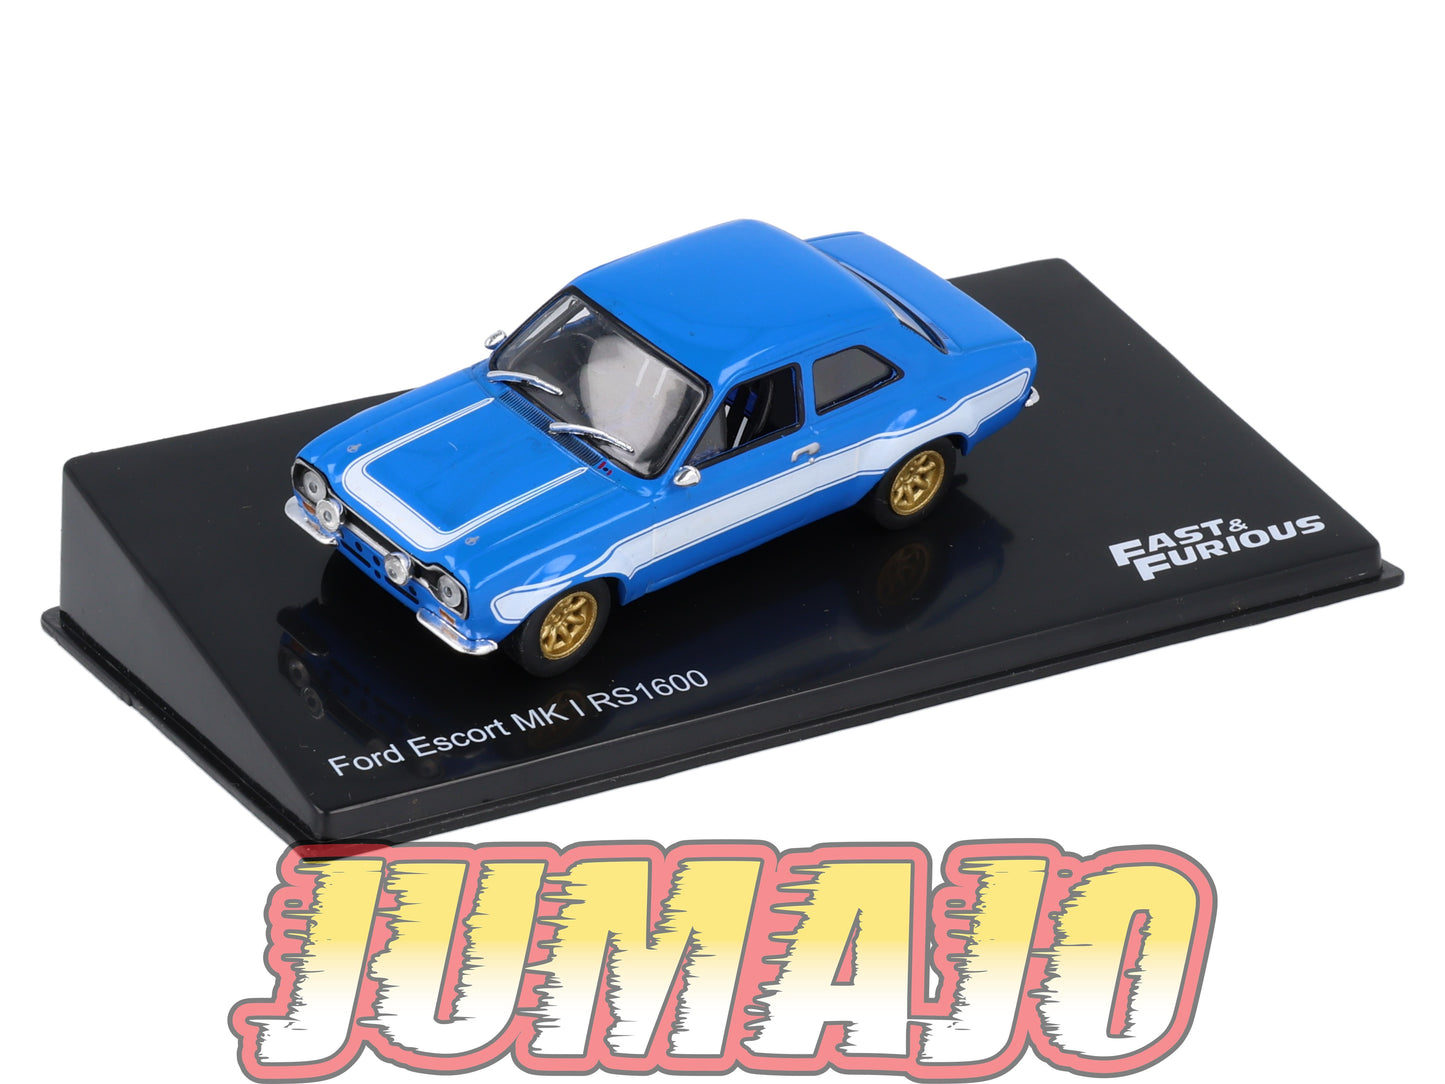 FF6 Voiture 1/43 IXO altaya Fast and Furious : Ford escort MK I RS1600